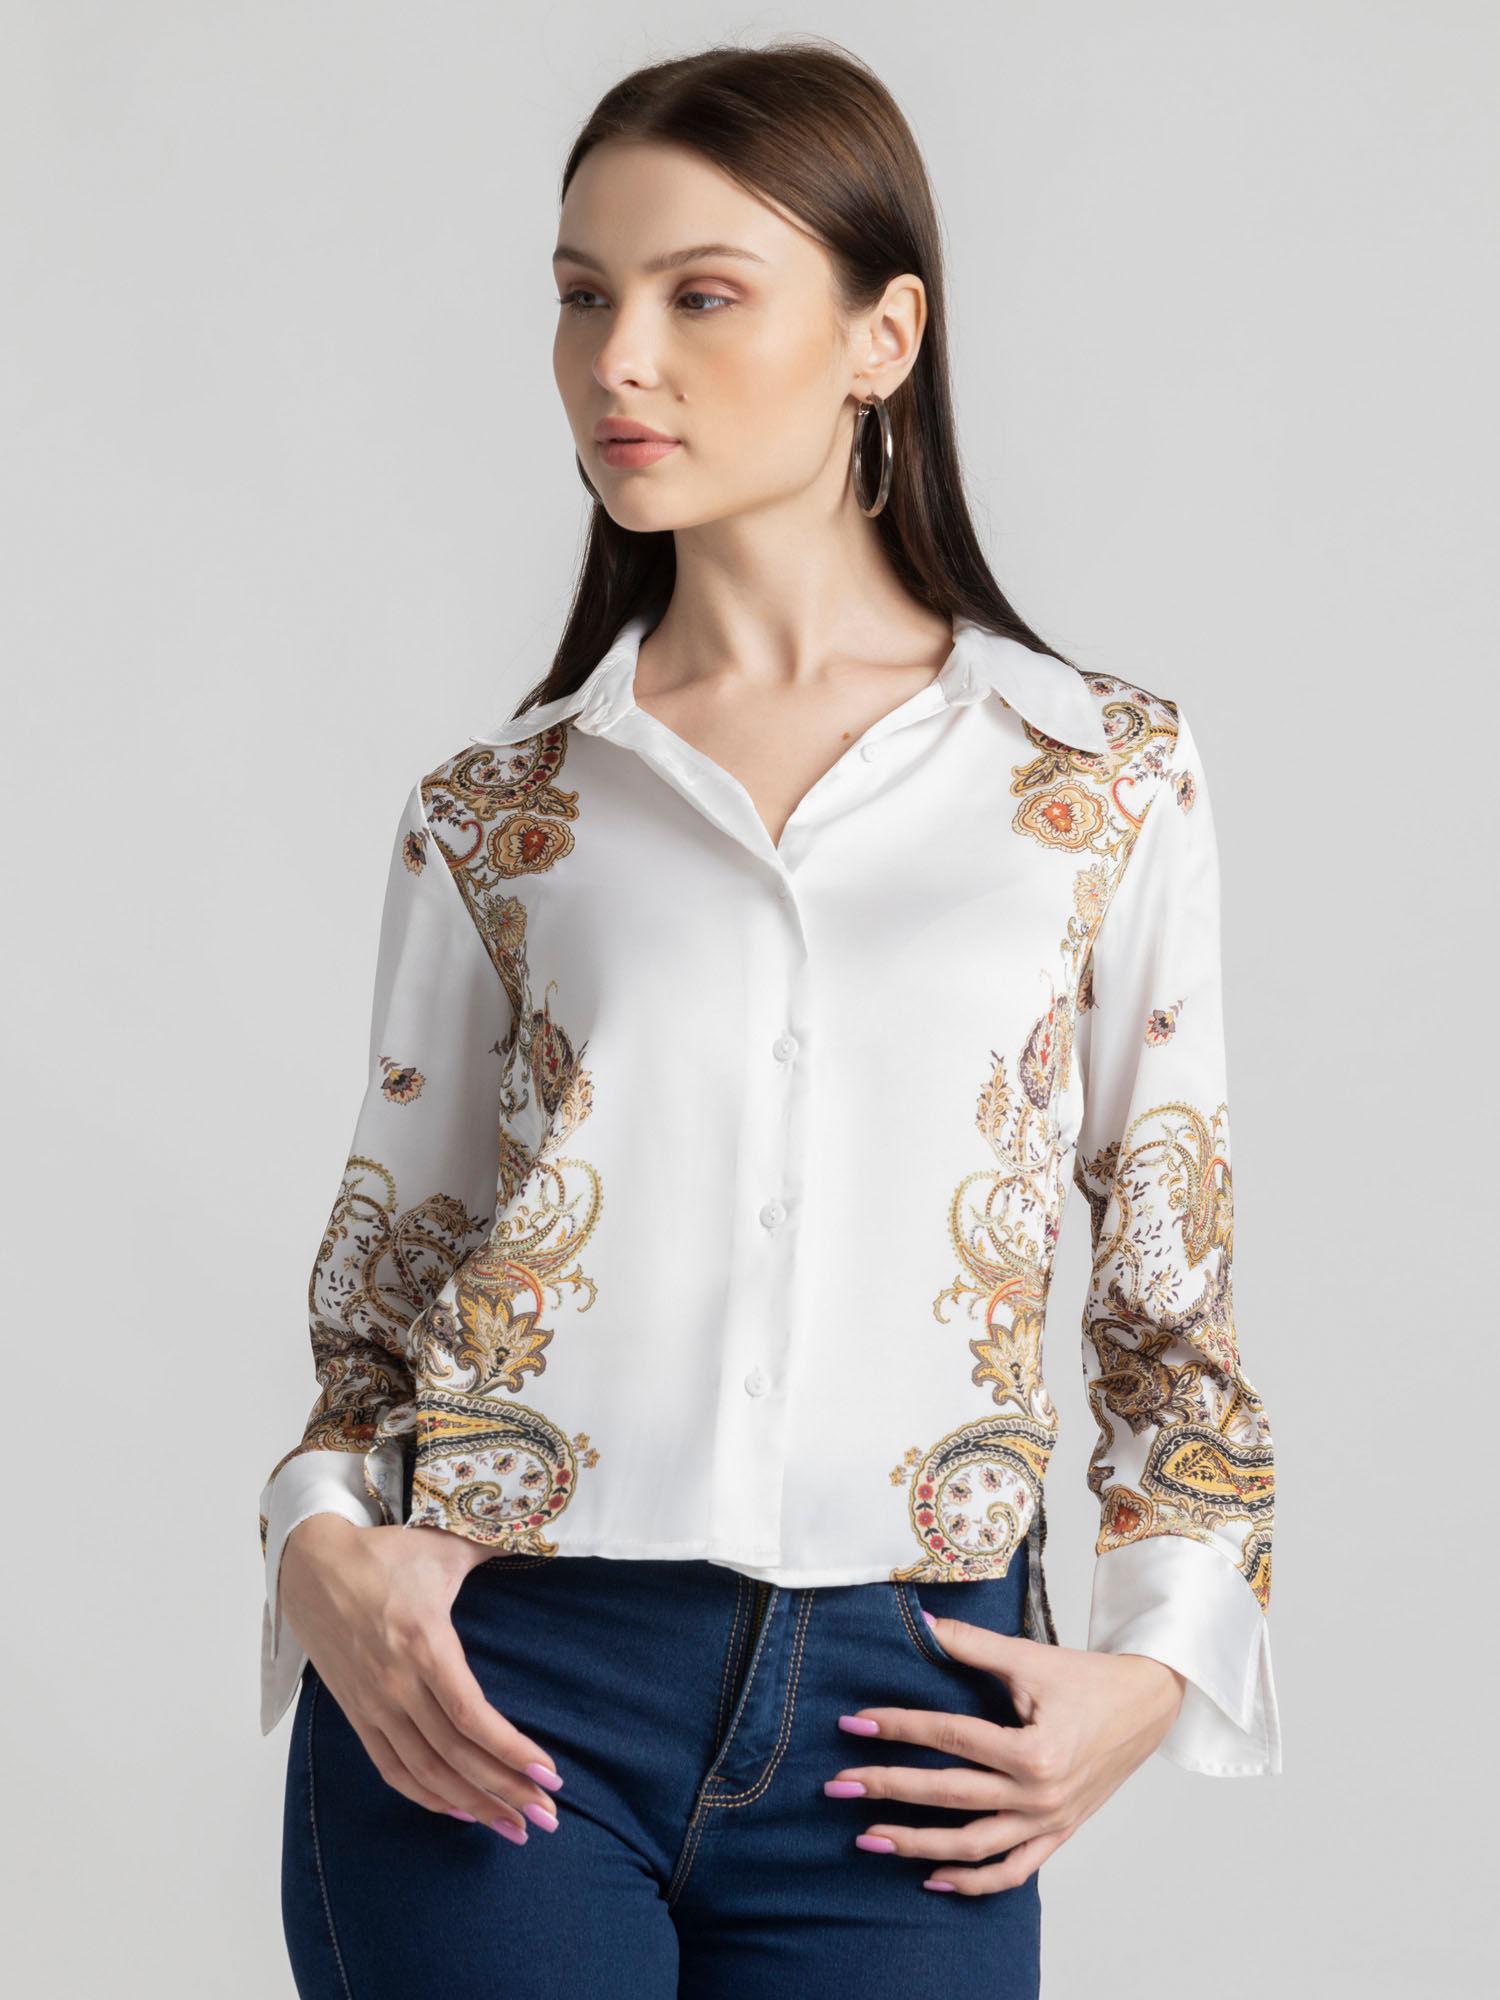 spread-collar-white-printed-long-sleeves-party-shirt-for-women